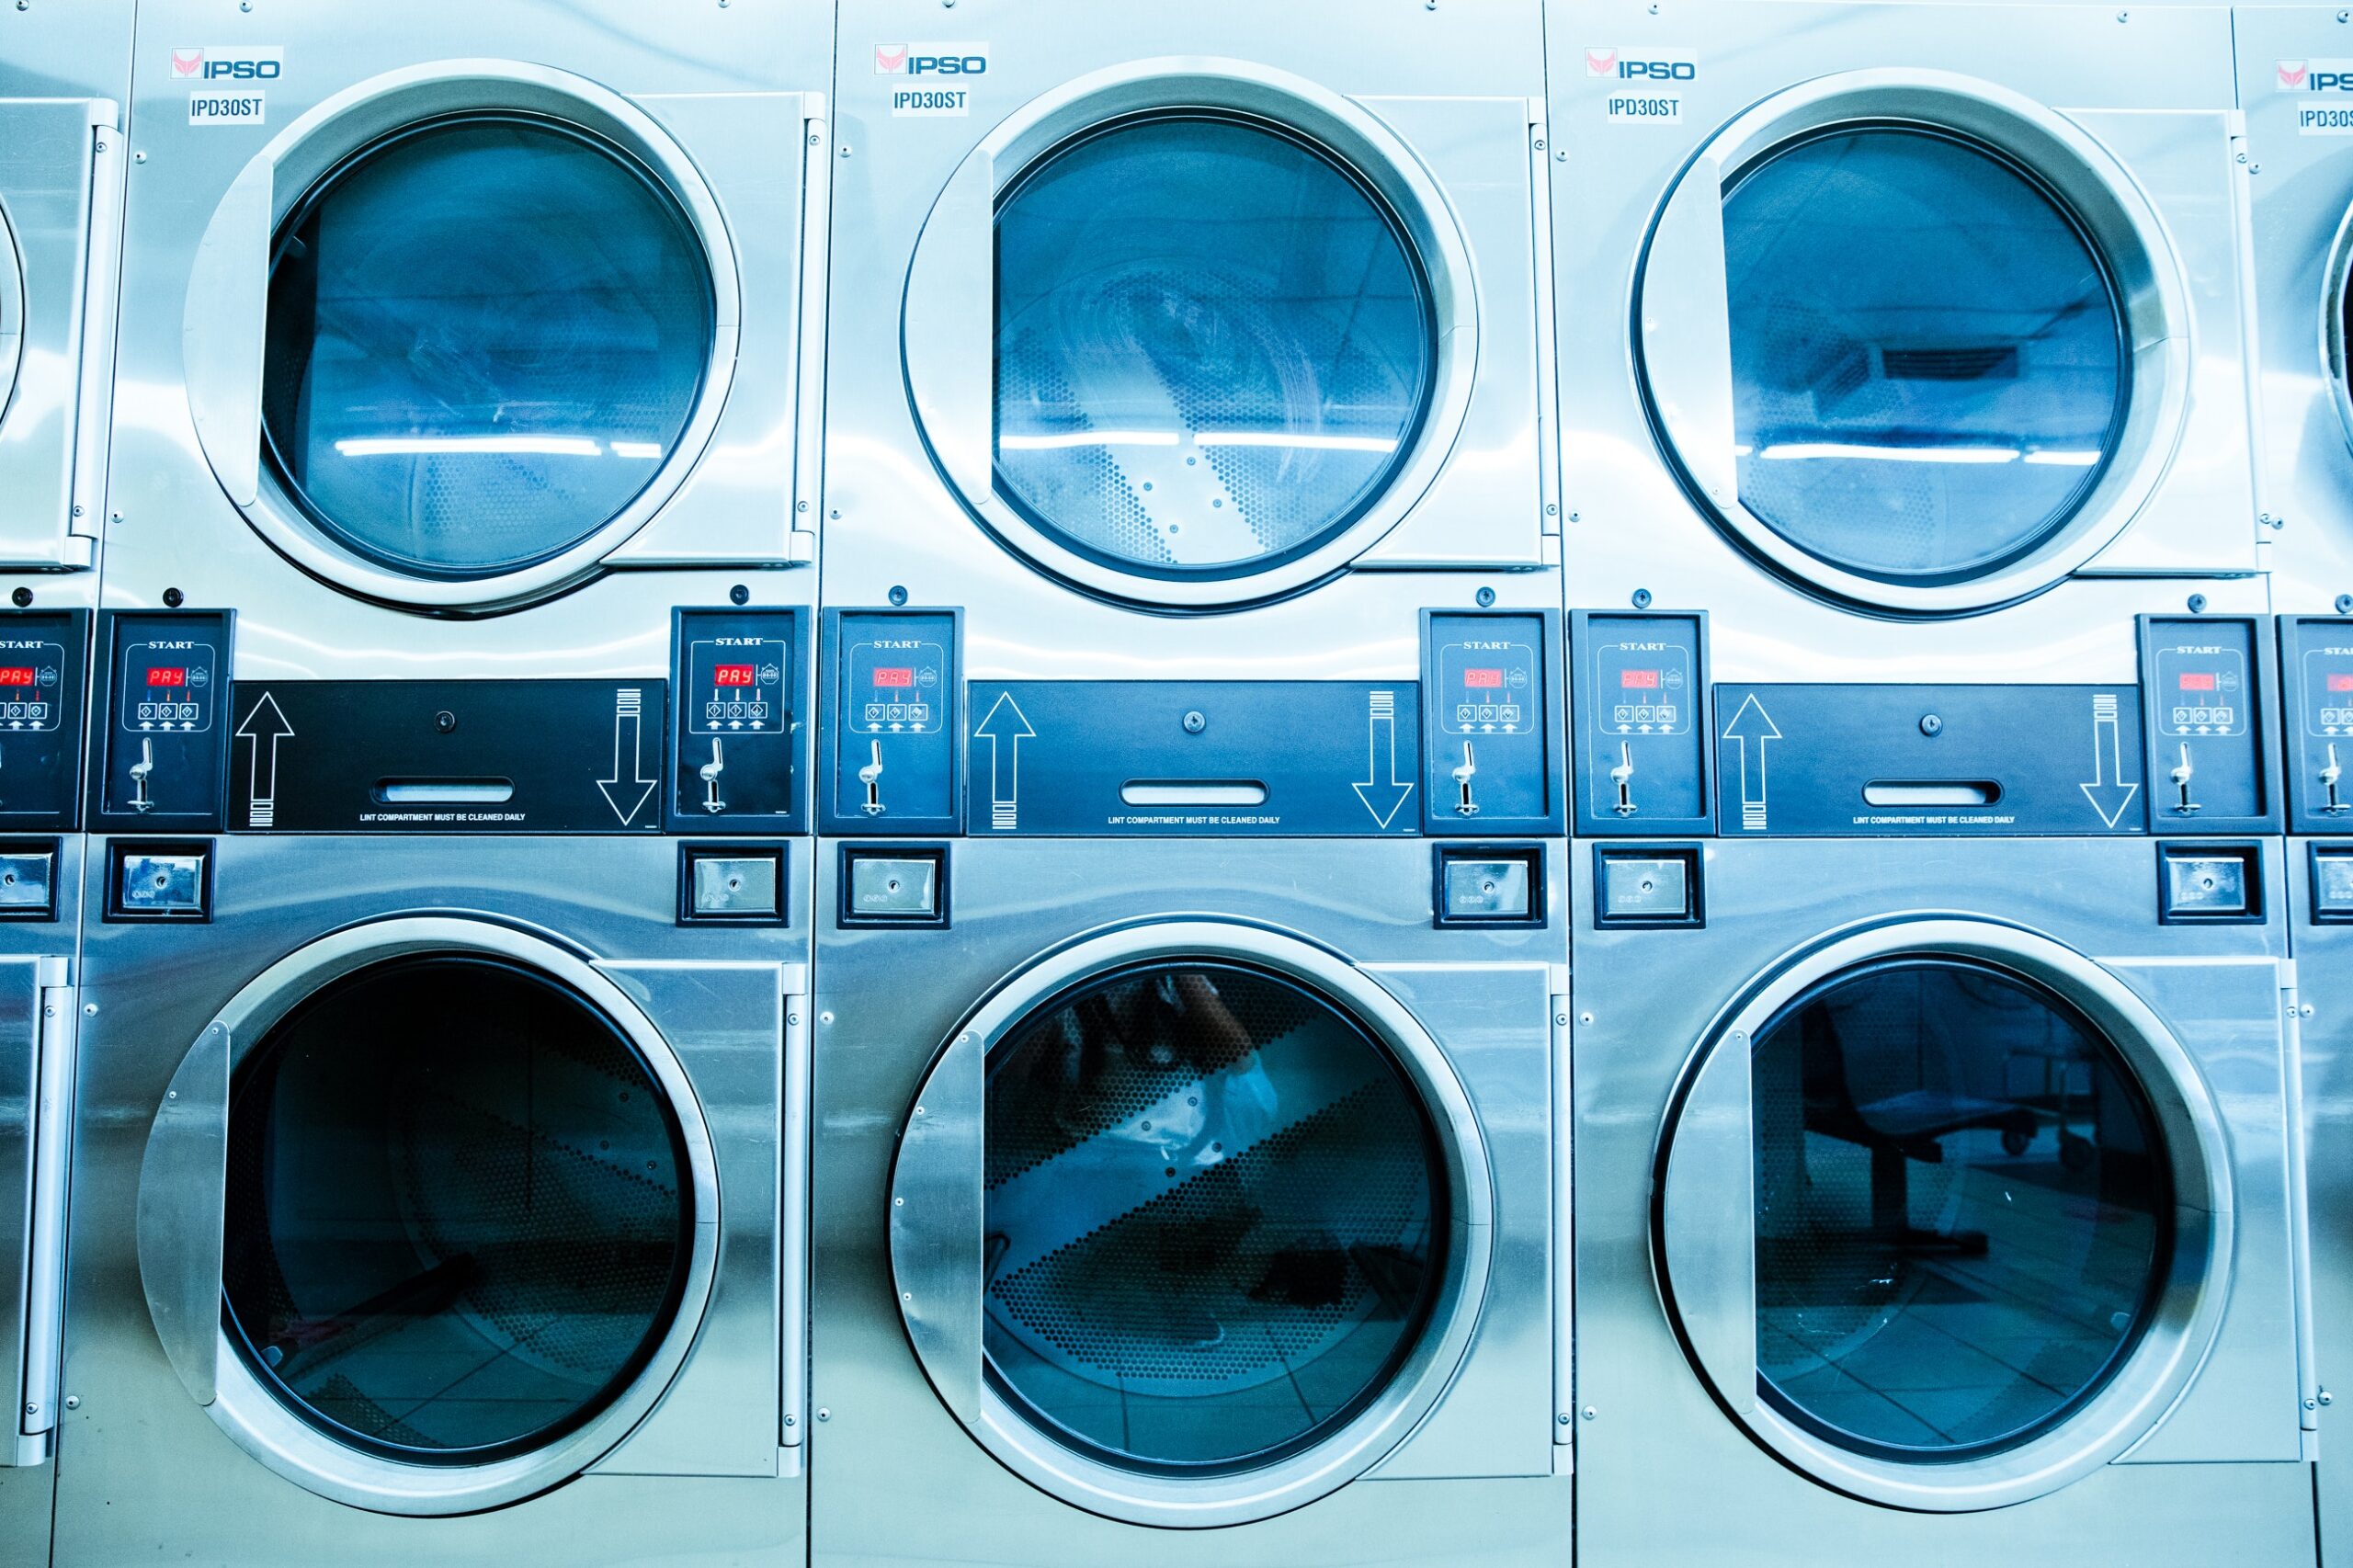 Row of commercial washing machines in laundromat.